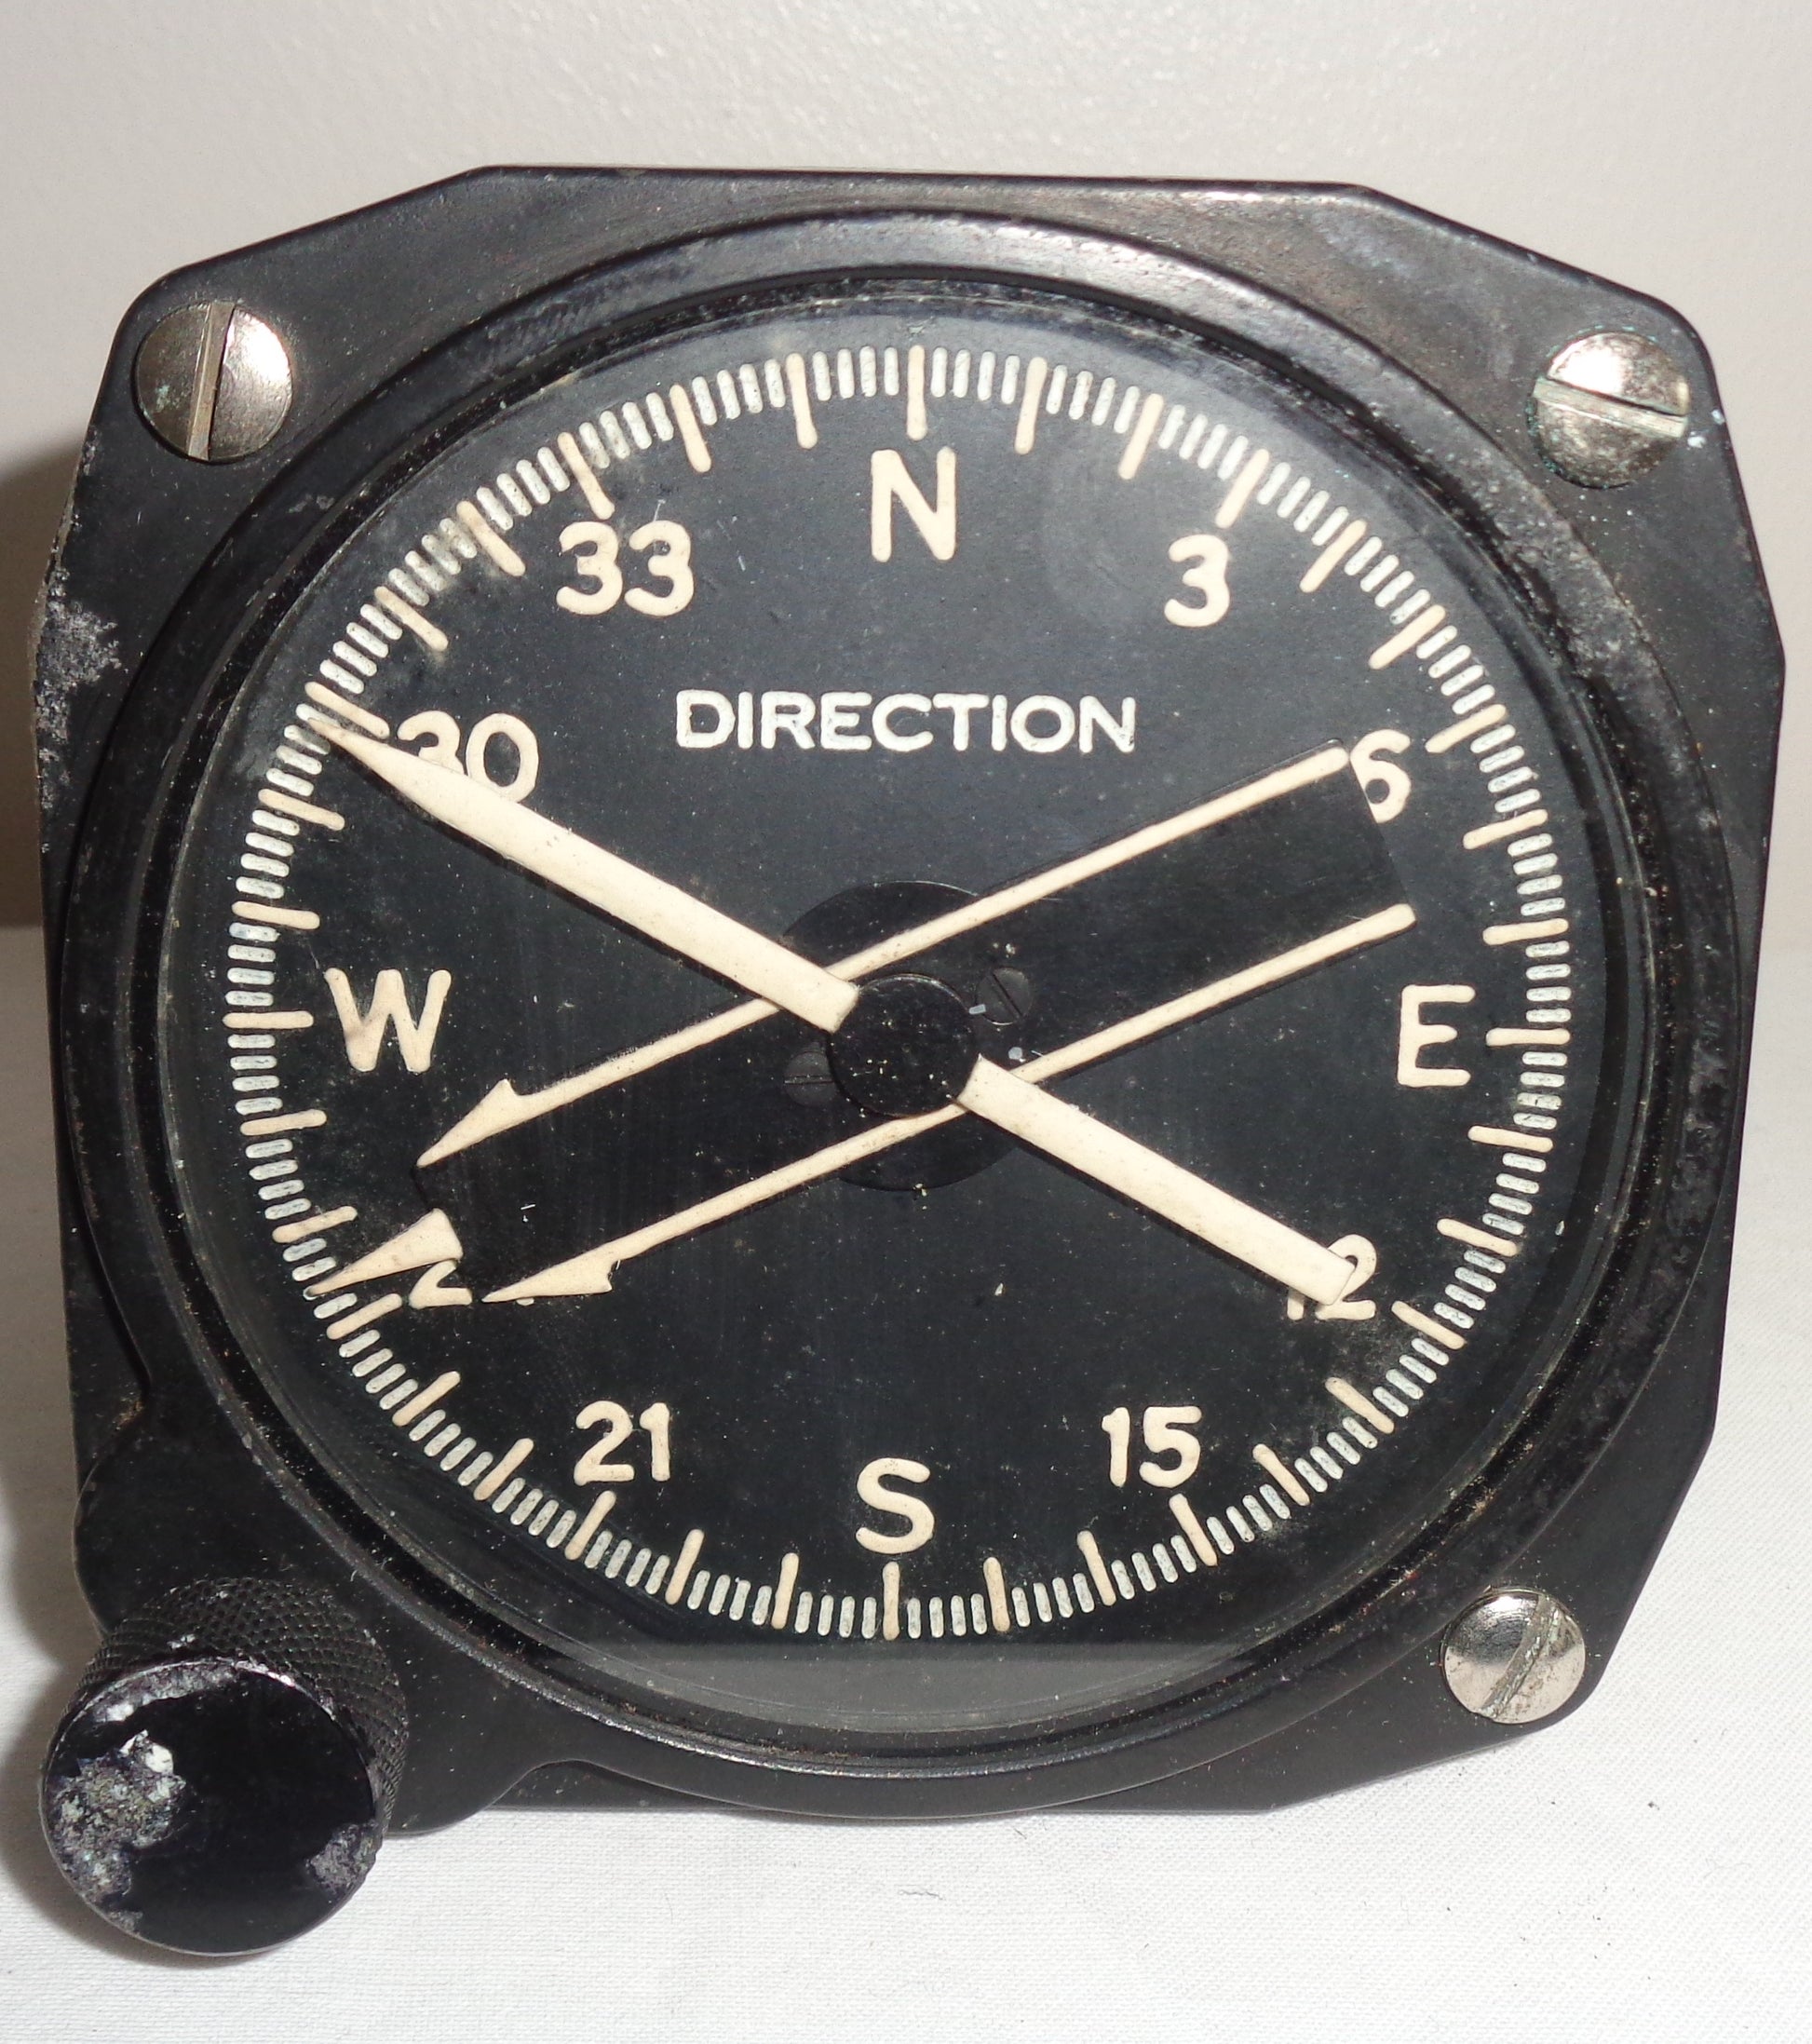 Bendix Eclipse Pioneer Selsyn Magslip Remote Indicating Compass AN5730/2A